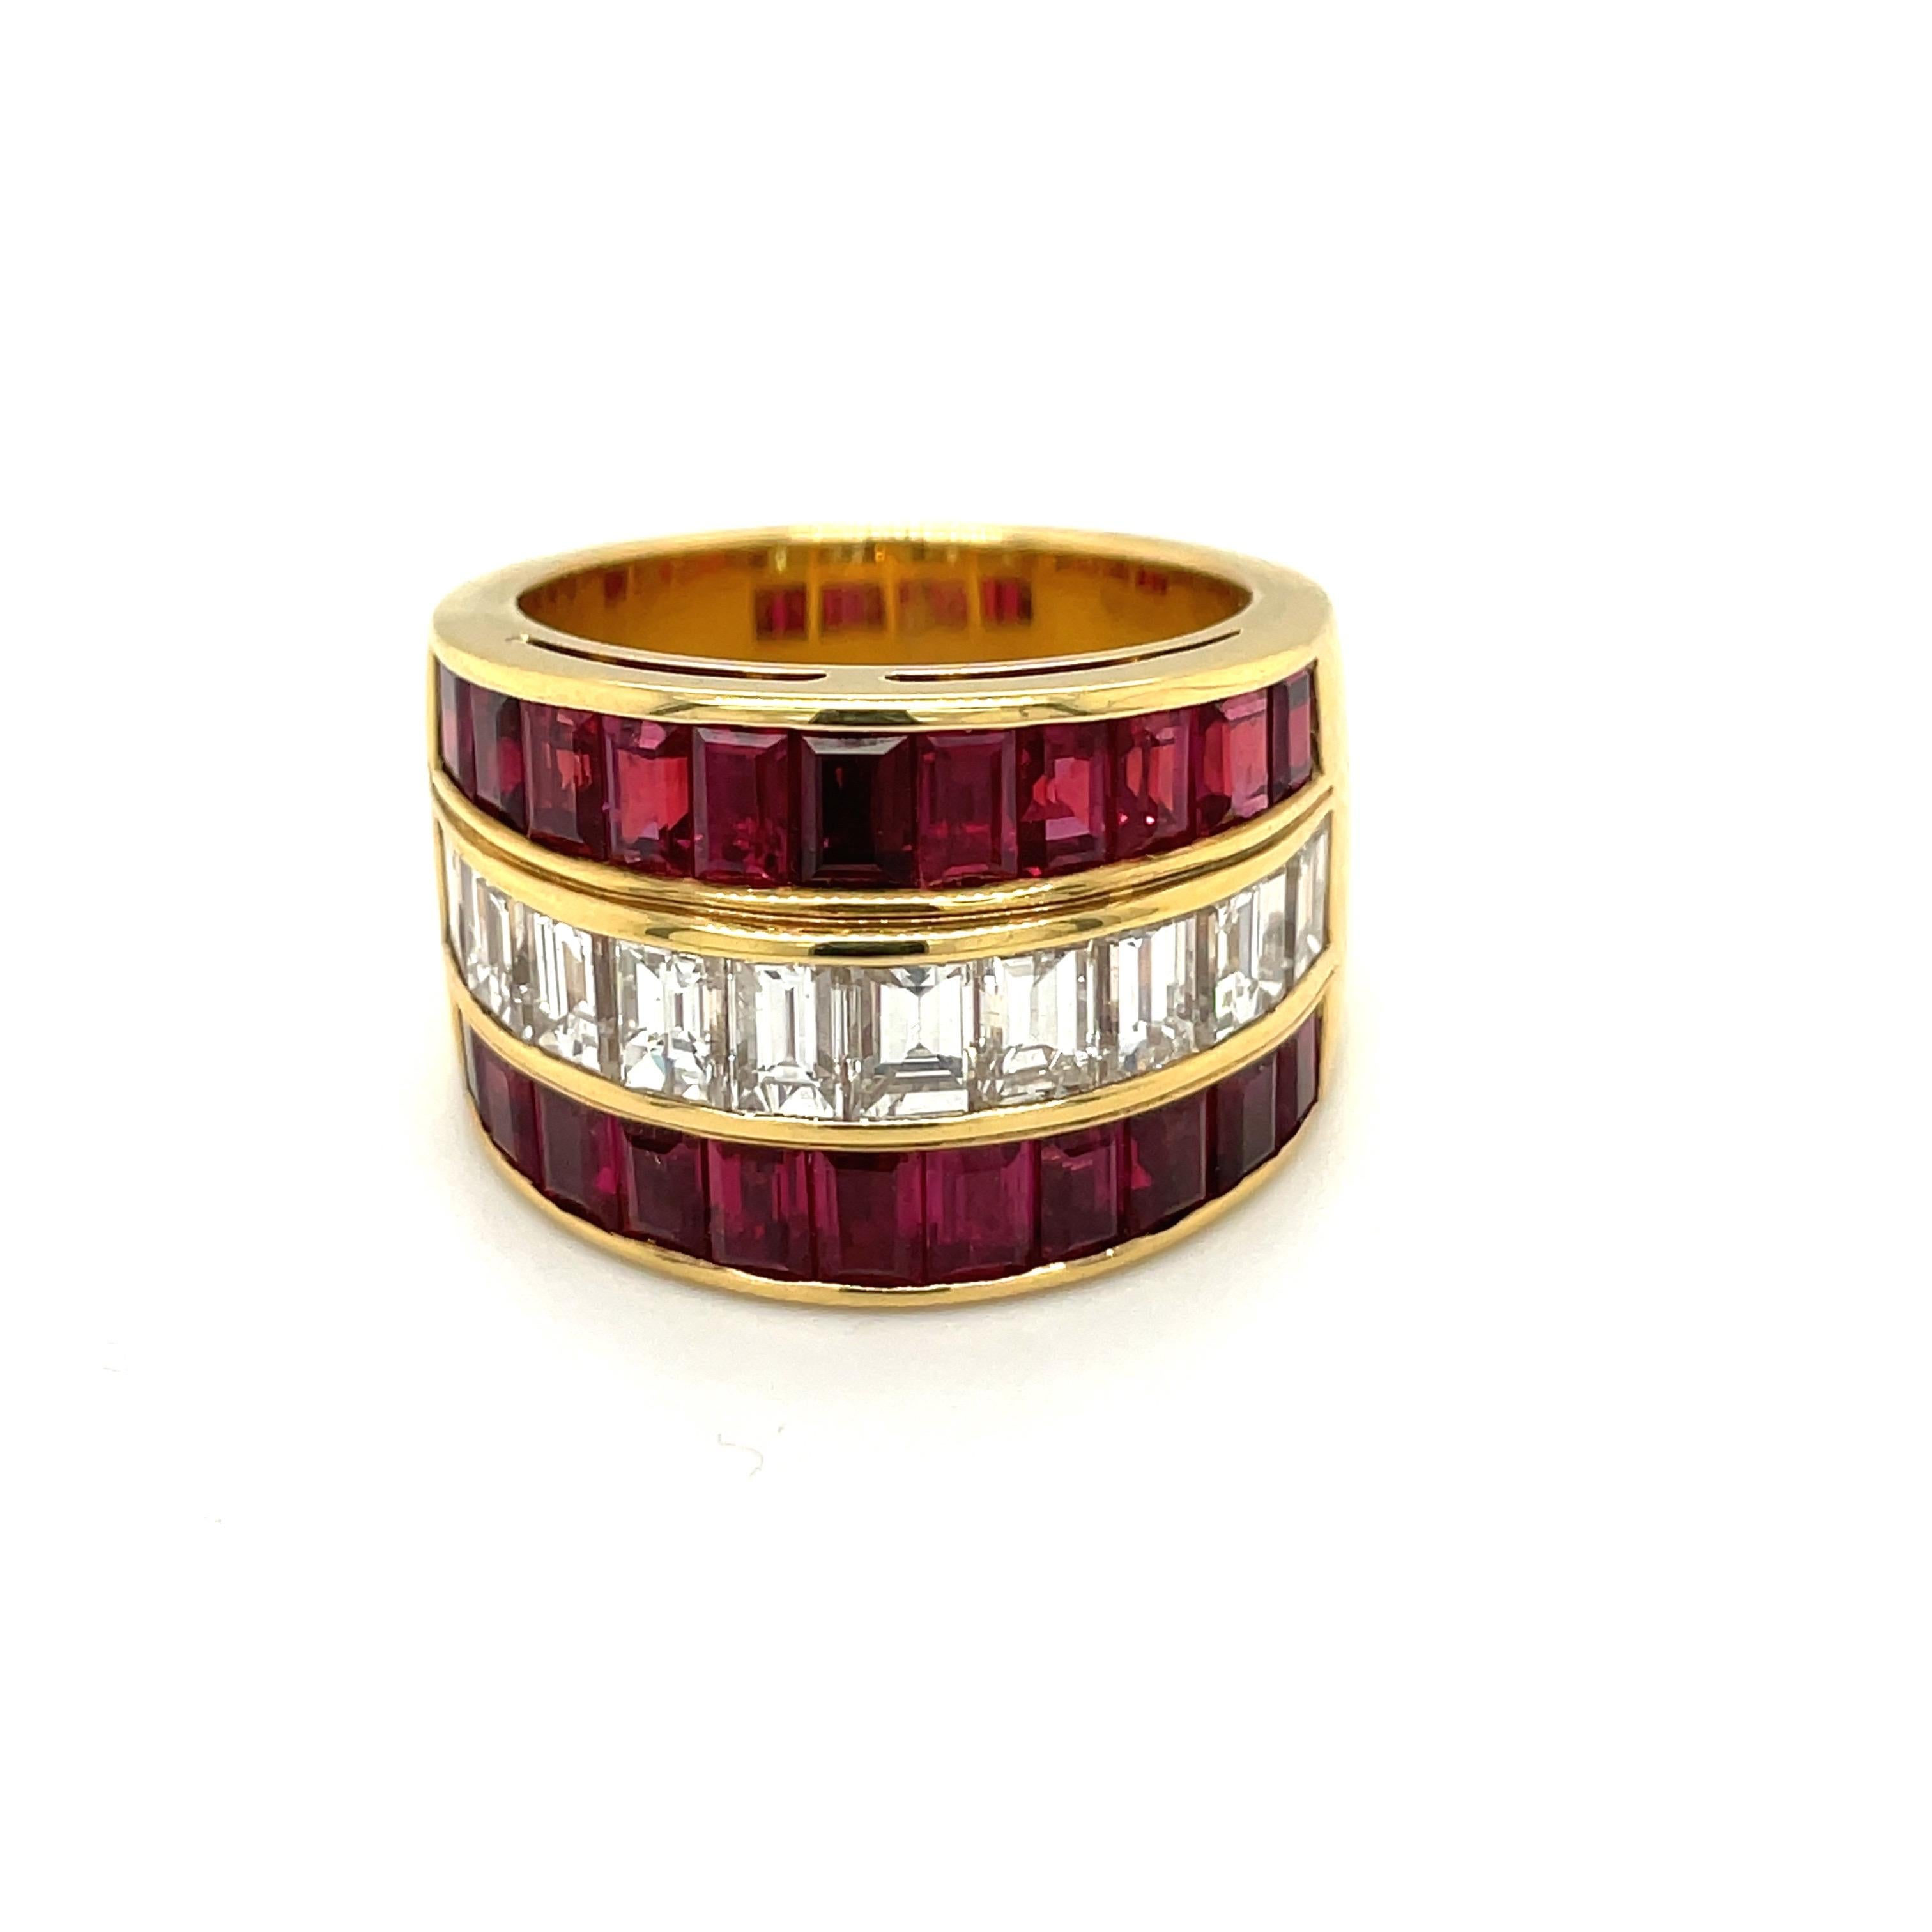 Designed by master craftsman Giuseppe Picchiotti . Cellini NYC presents this 18 karat yellow gold band ring beautifully set with a center row of  baguette cut diamonds , and 2 rows of baguette rubies. The ring measures 14 mm at the widest and tapers